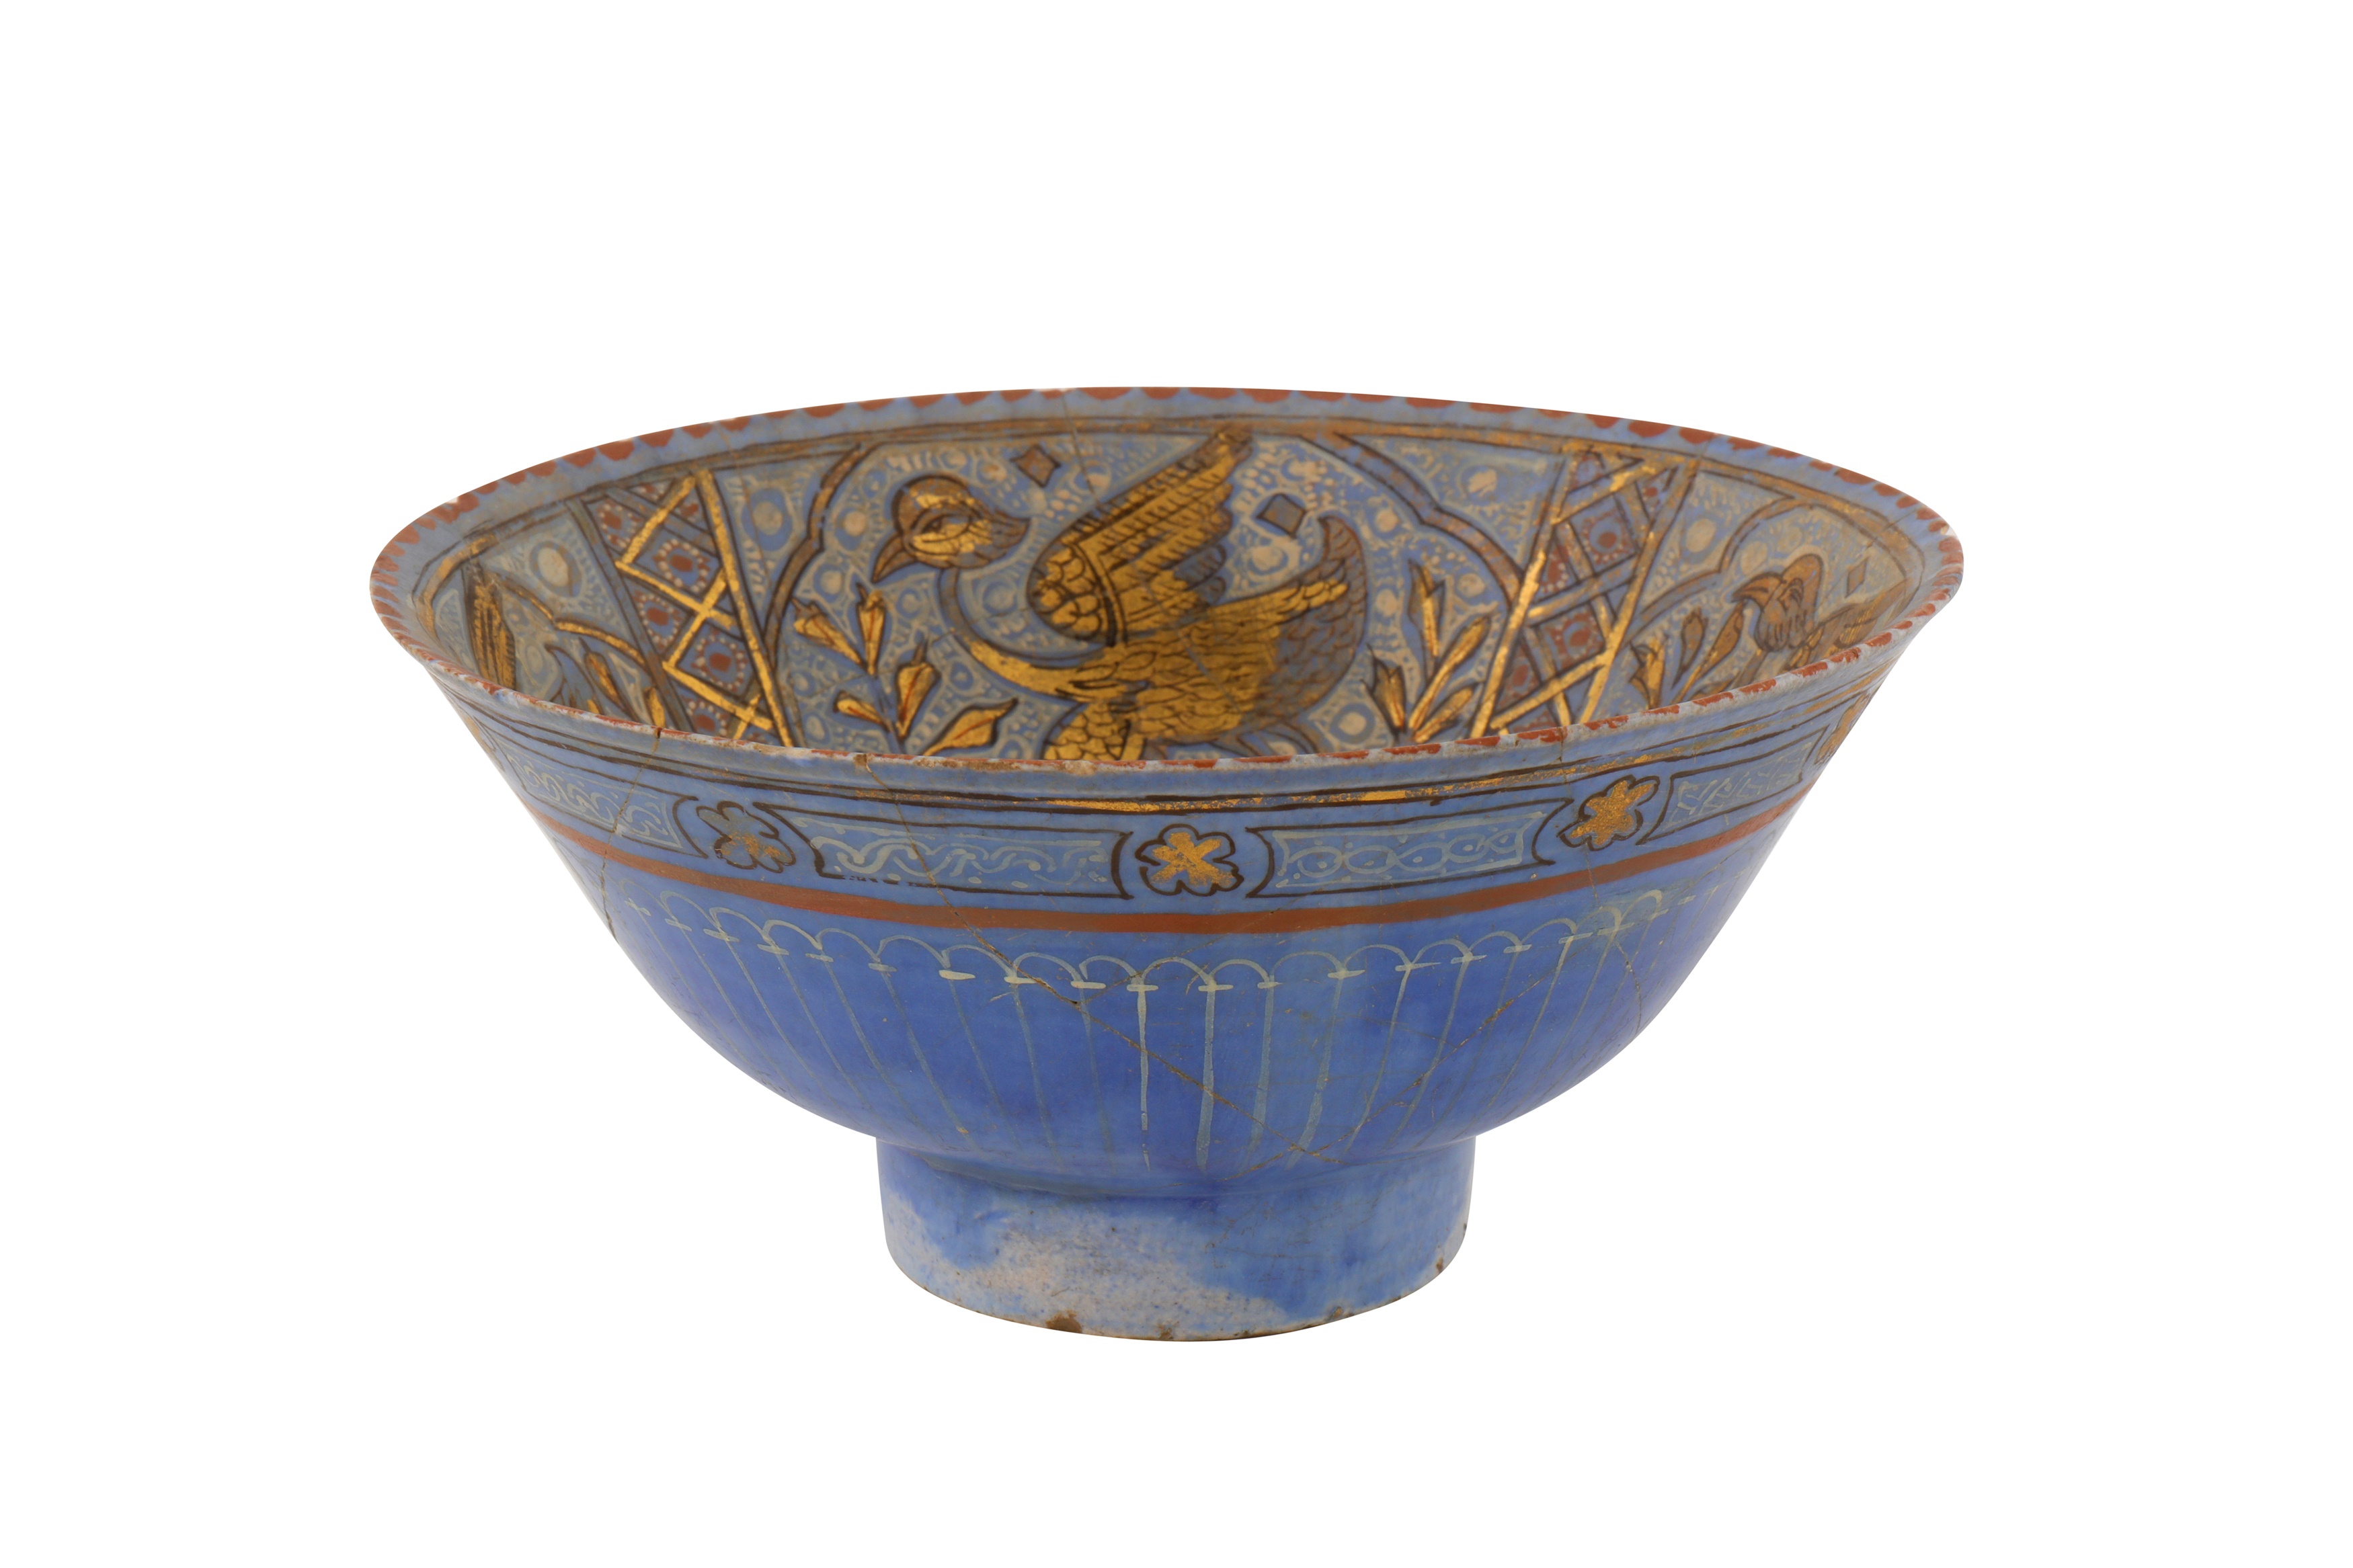 A VERY FINE POSSIBLY 12TH-13TH CENTURY PERSIAN SELJUK MINA’I GILDED AND GLAZED POTTERY BOWL - Image 2 of 4